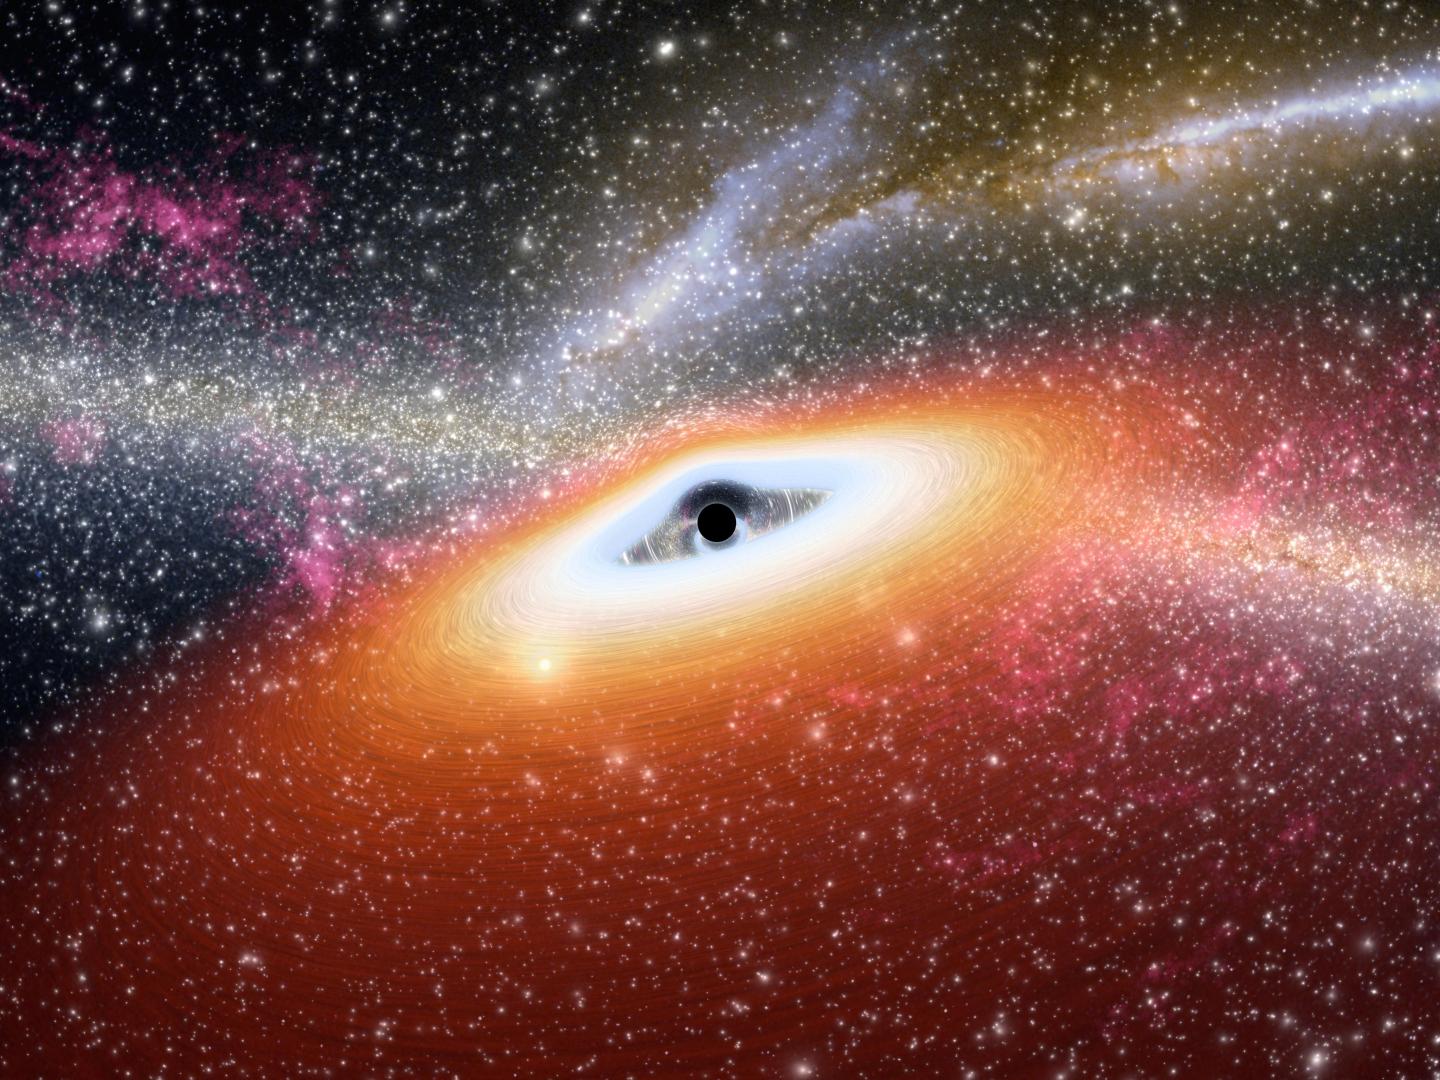 'Looking' at the Supermassive Black Hole Seeds Grow